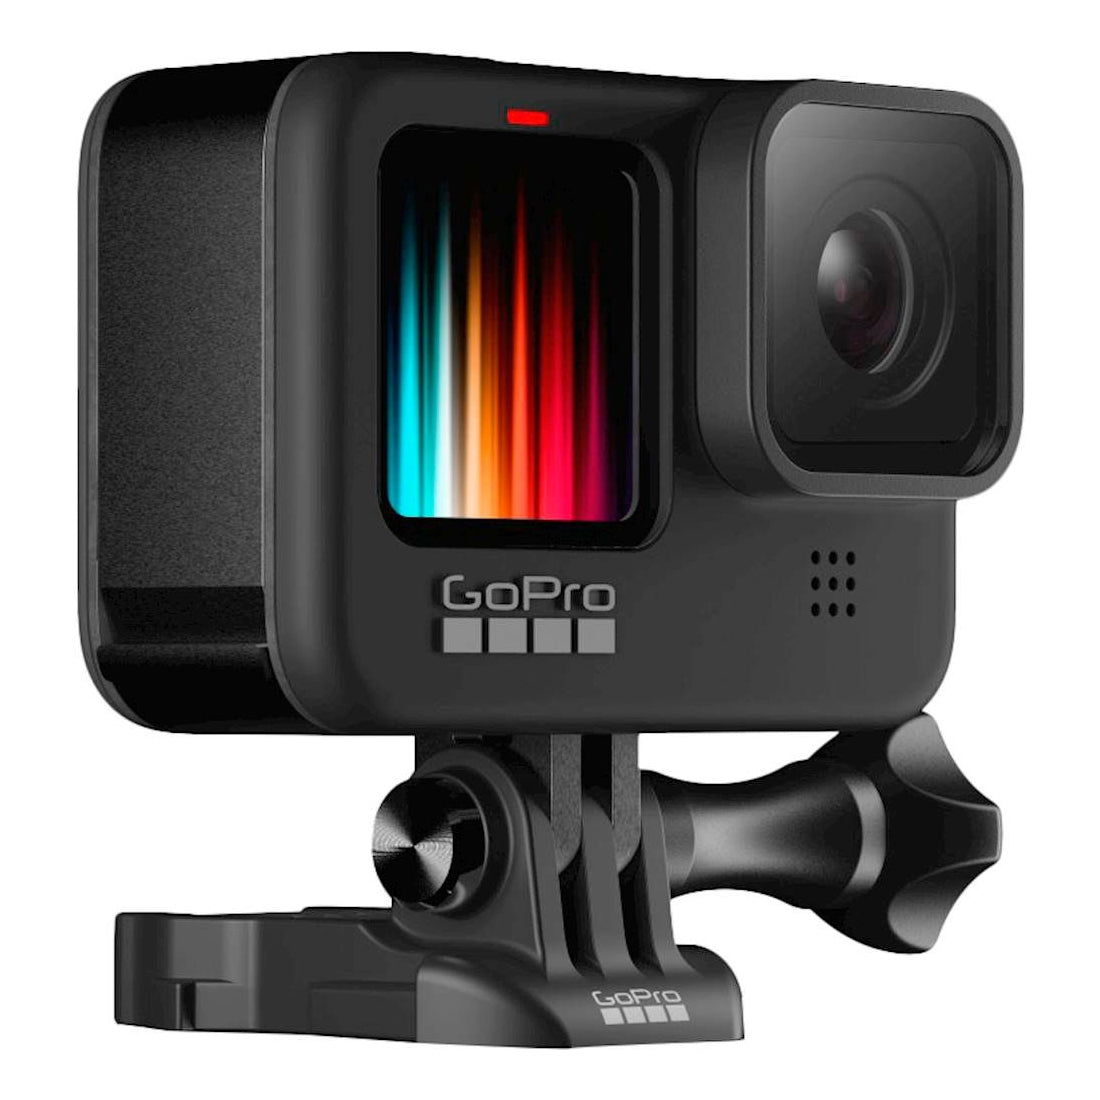 GoPro HERO12 Black - Waterproof Action Camera with 5.3K Ultra HD, 27MP  Photos, Live Streaming, Webcam, Stabilization + Bundle with 64GB Card, Card